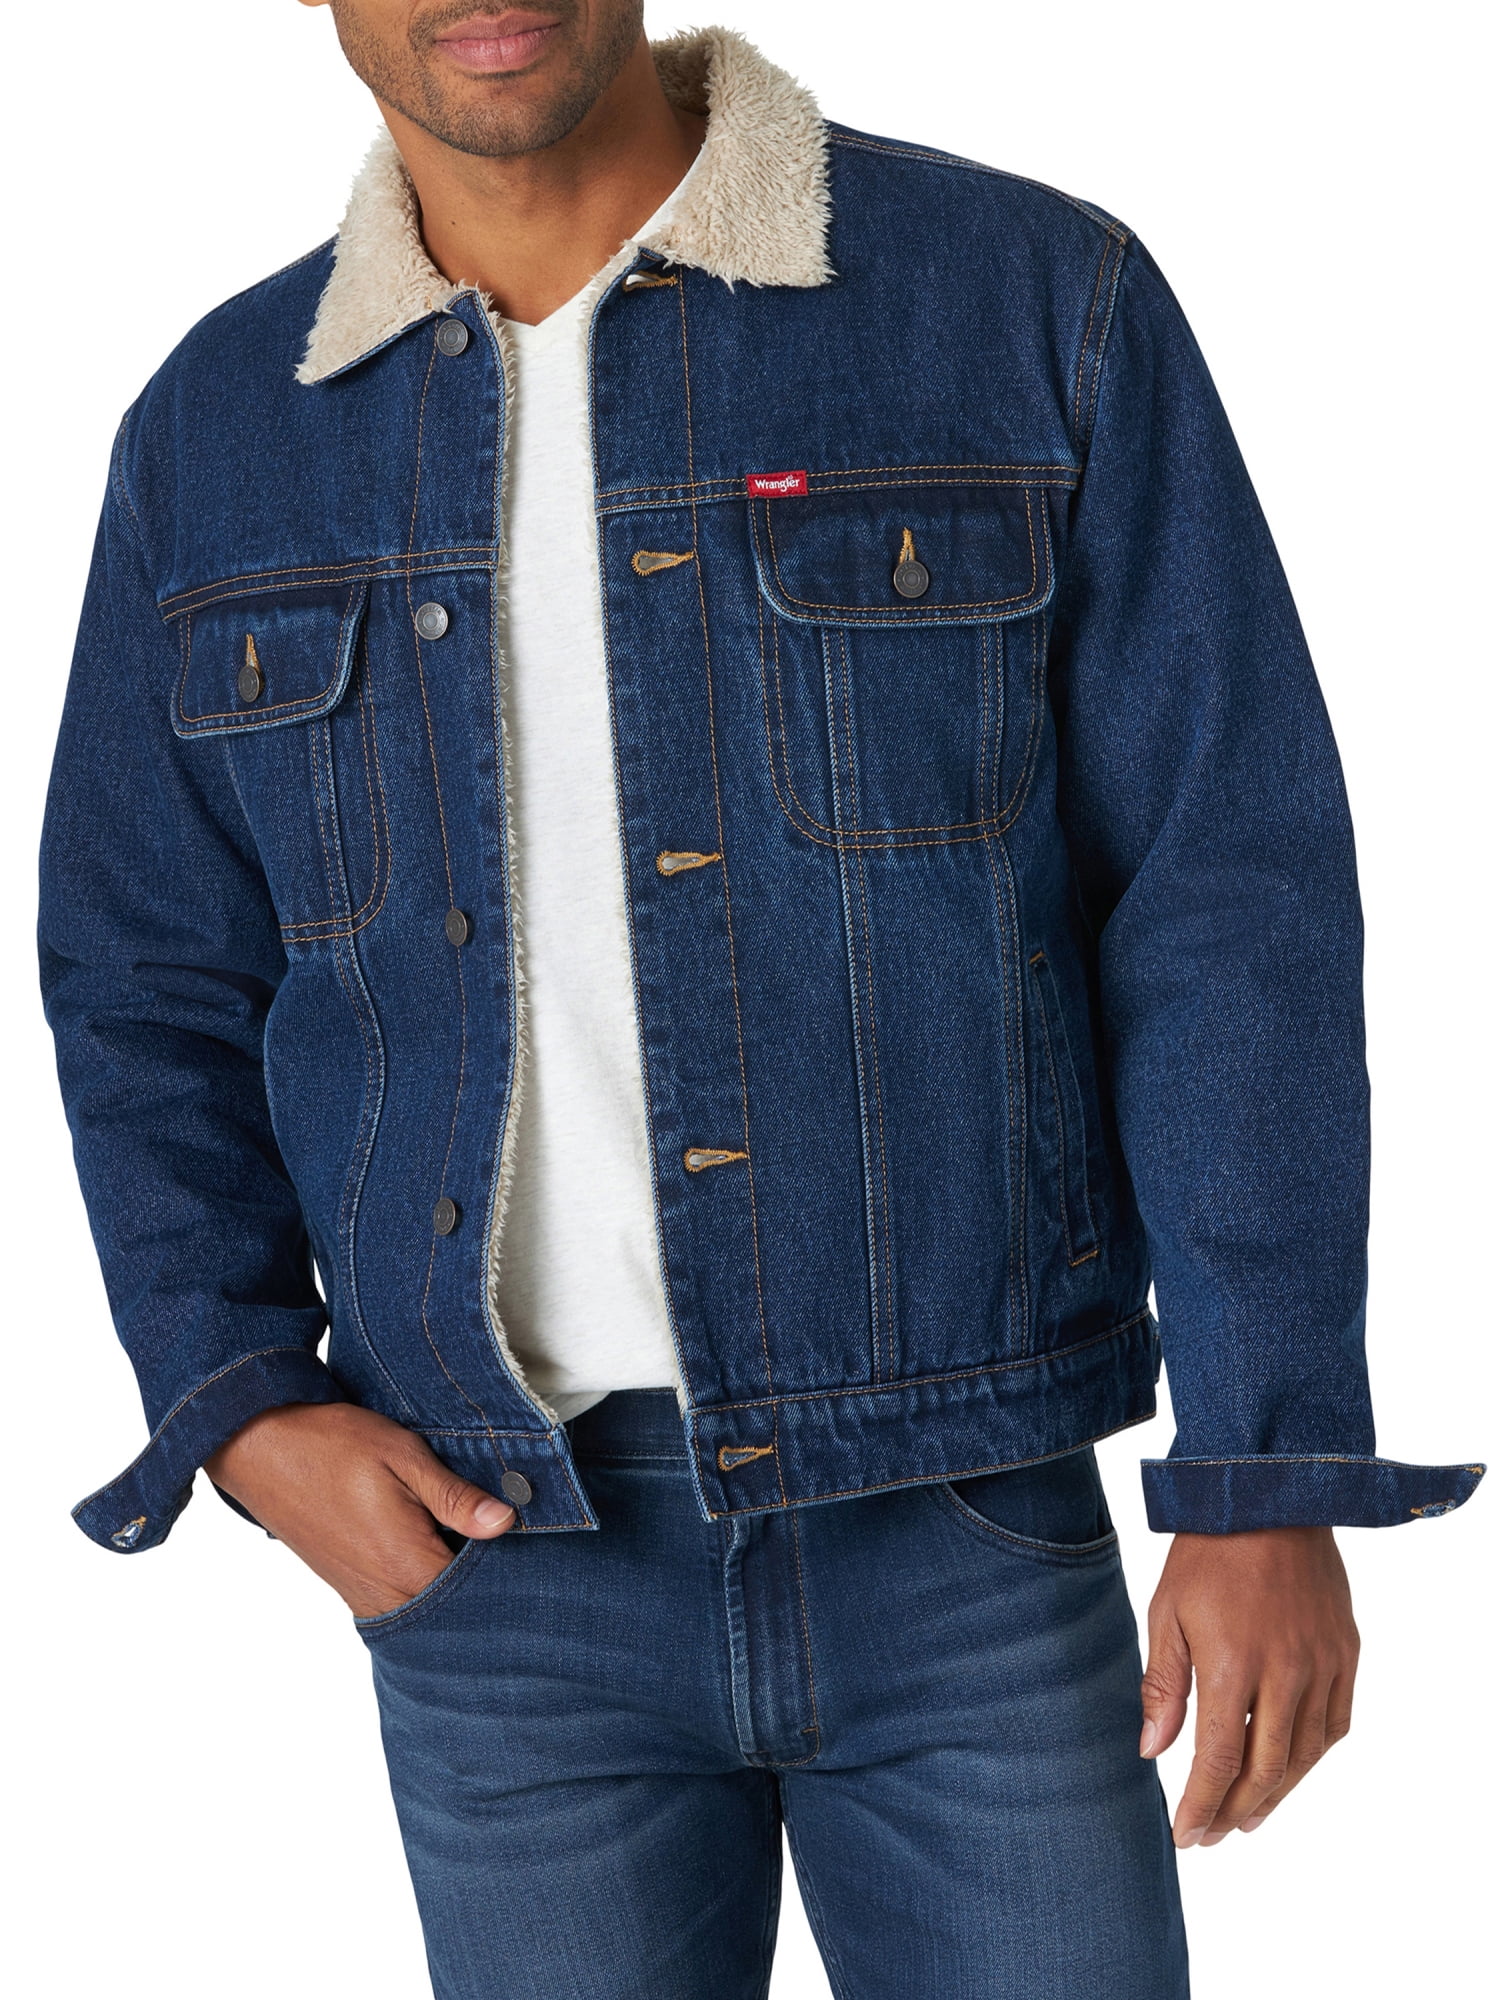 Details about   Wrangler Men's Big and Tall Foothills Jacket 